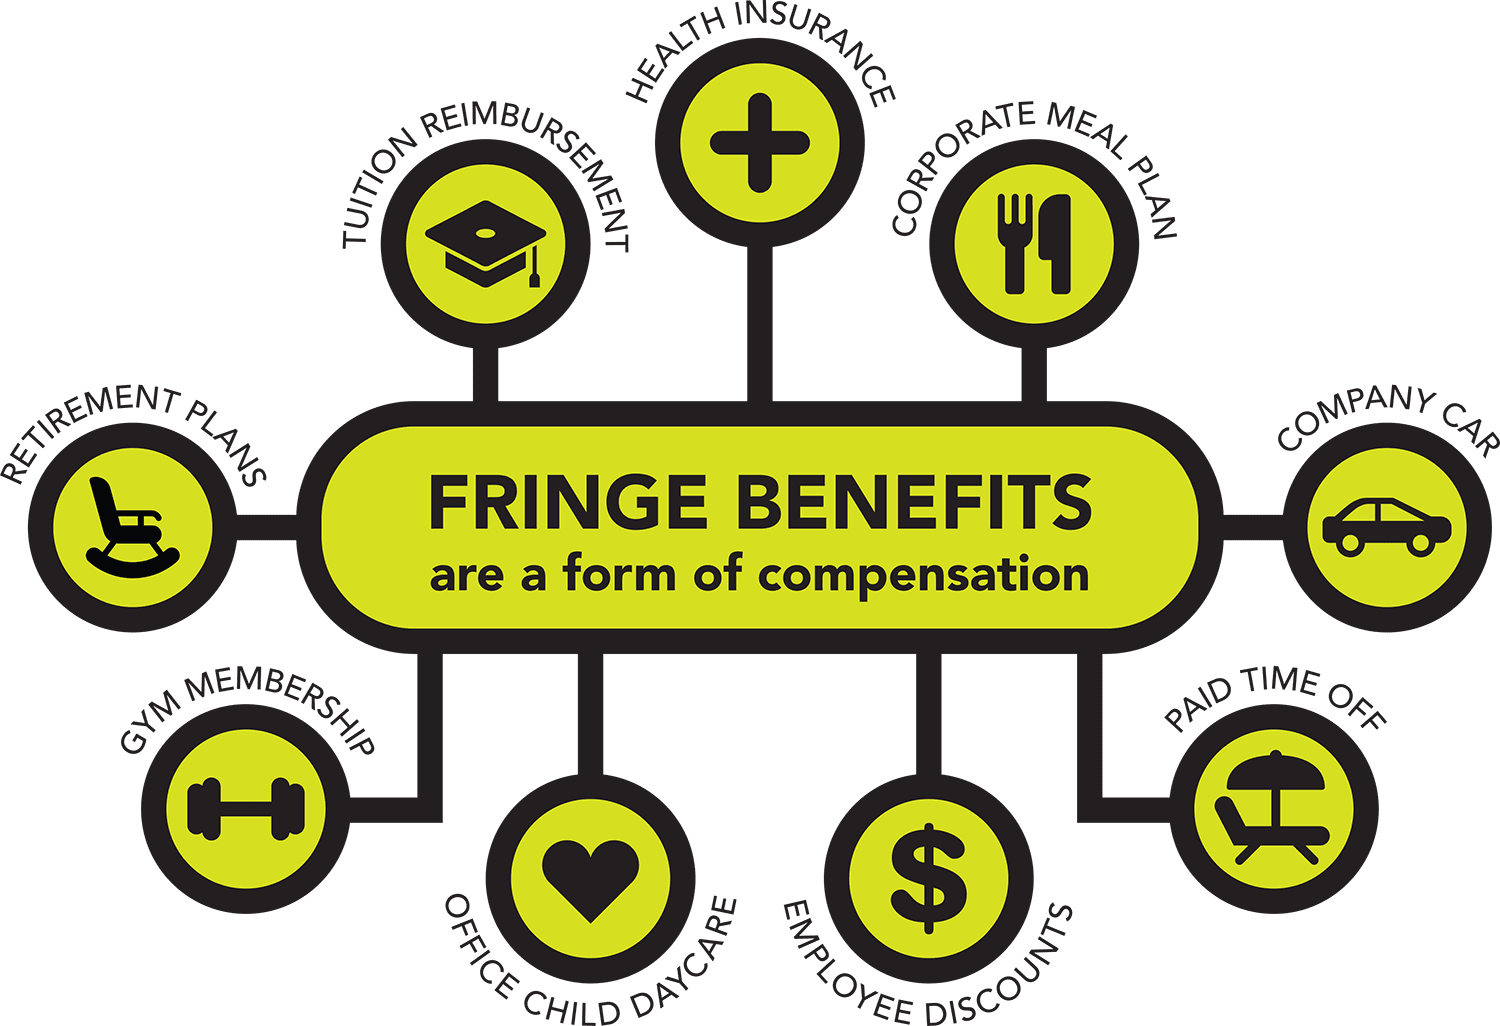 Fringe benefits can be very valuable, especially in the form of health insurance.